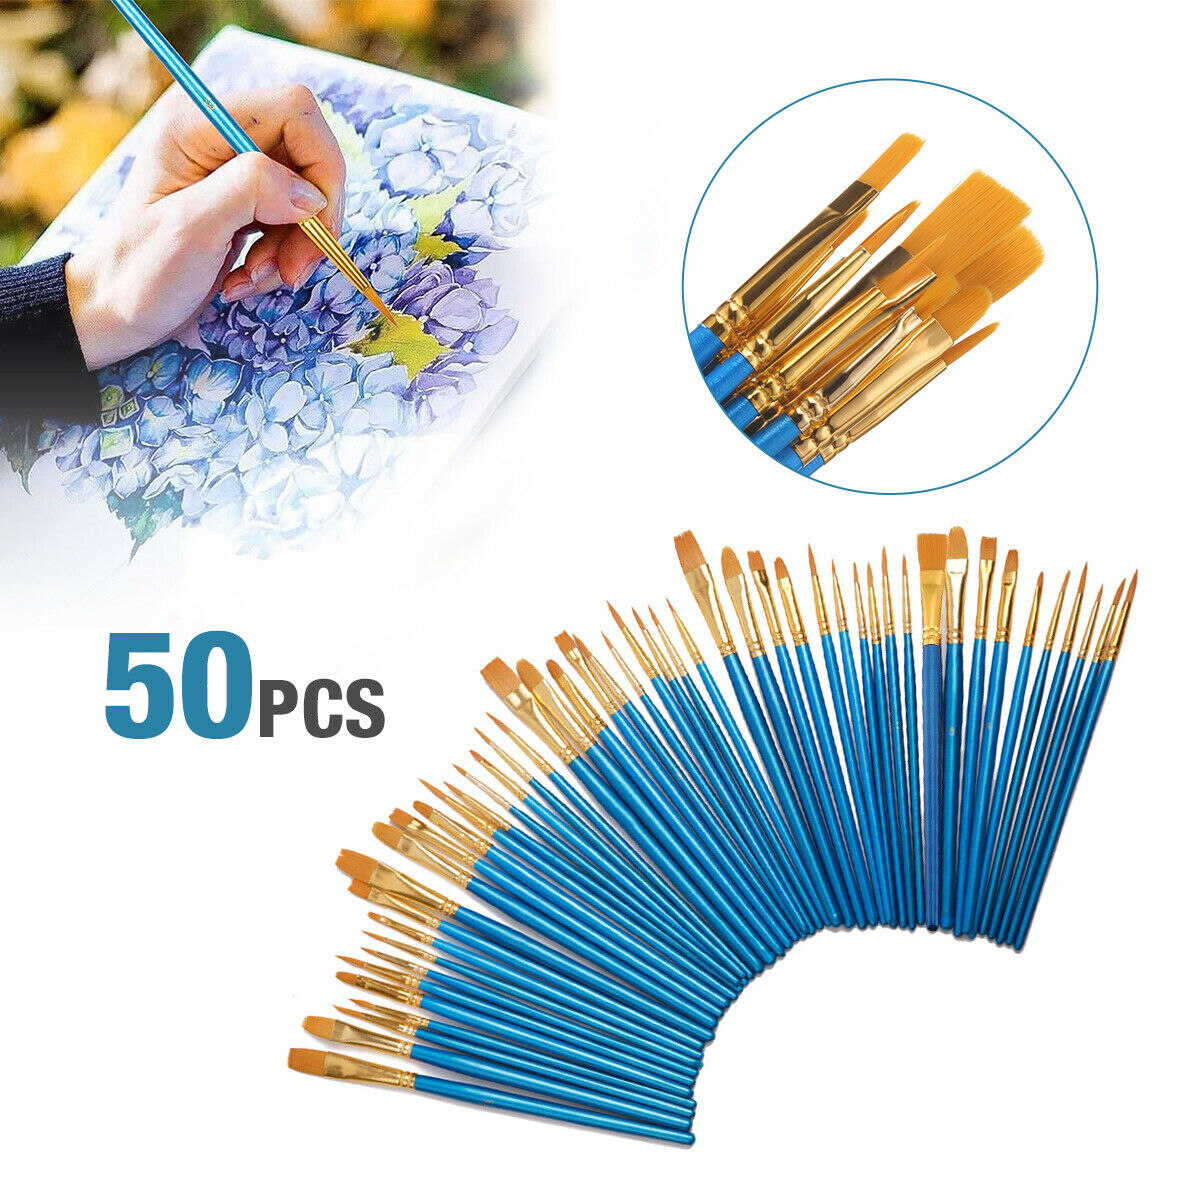 50PCS Paint Brushes Acrylic Painting Brush Set Art Watercolor Paintbrushes Craft Unbranded Does Not Apply